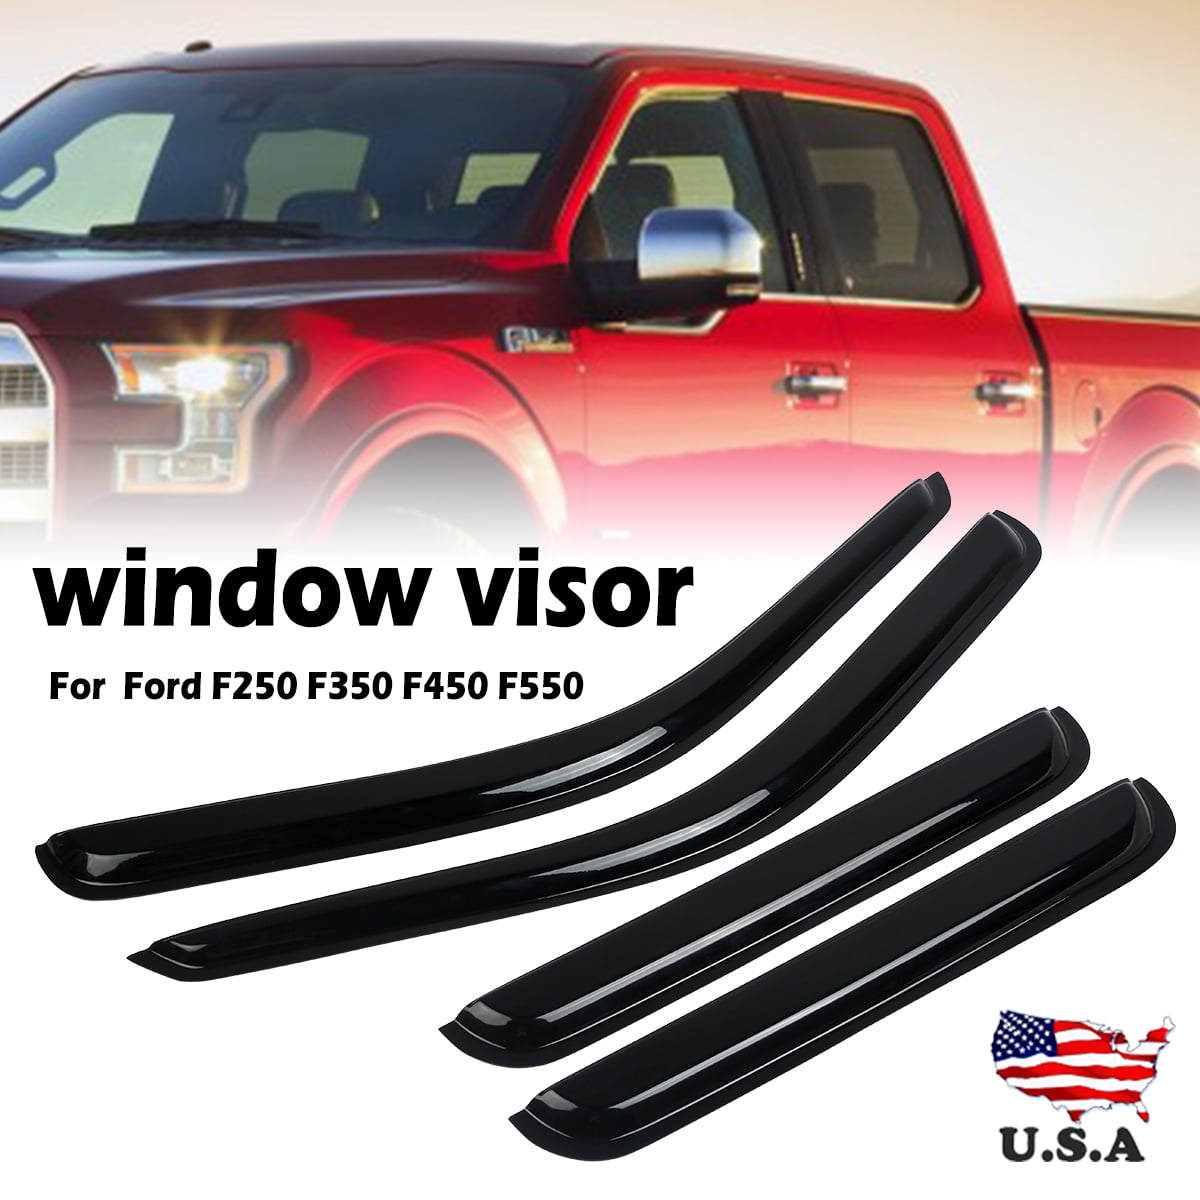 Light Tinted Out-Channel Vent Visor 2pcs For 1999-2016 Ford F-450 Regular Cab